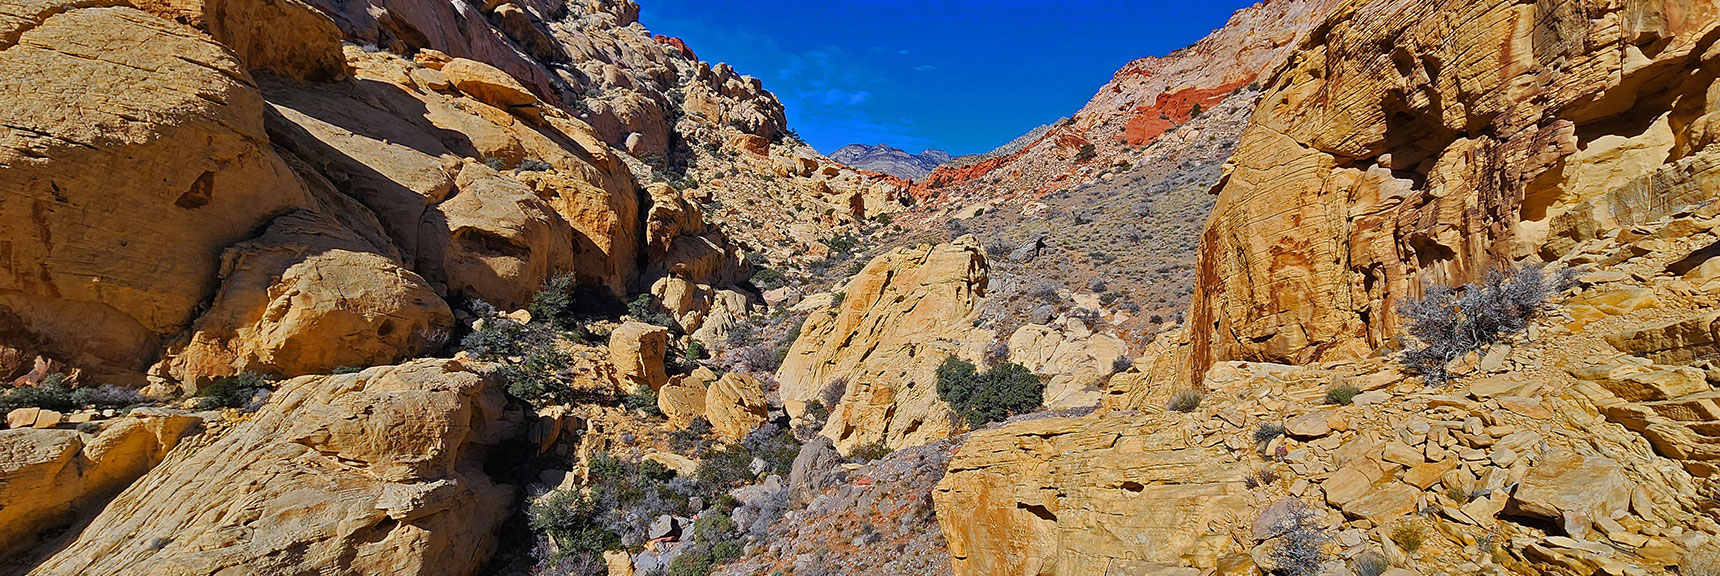 Continue Ahead Through Upper Ash Canyon on the Ash Canyon Trail! | Upper Calico Hills Loop | Calico Basin and Red Rock Canyon, Nevada